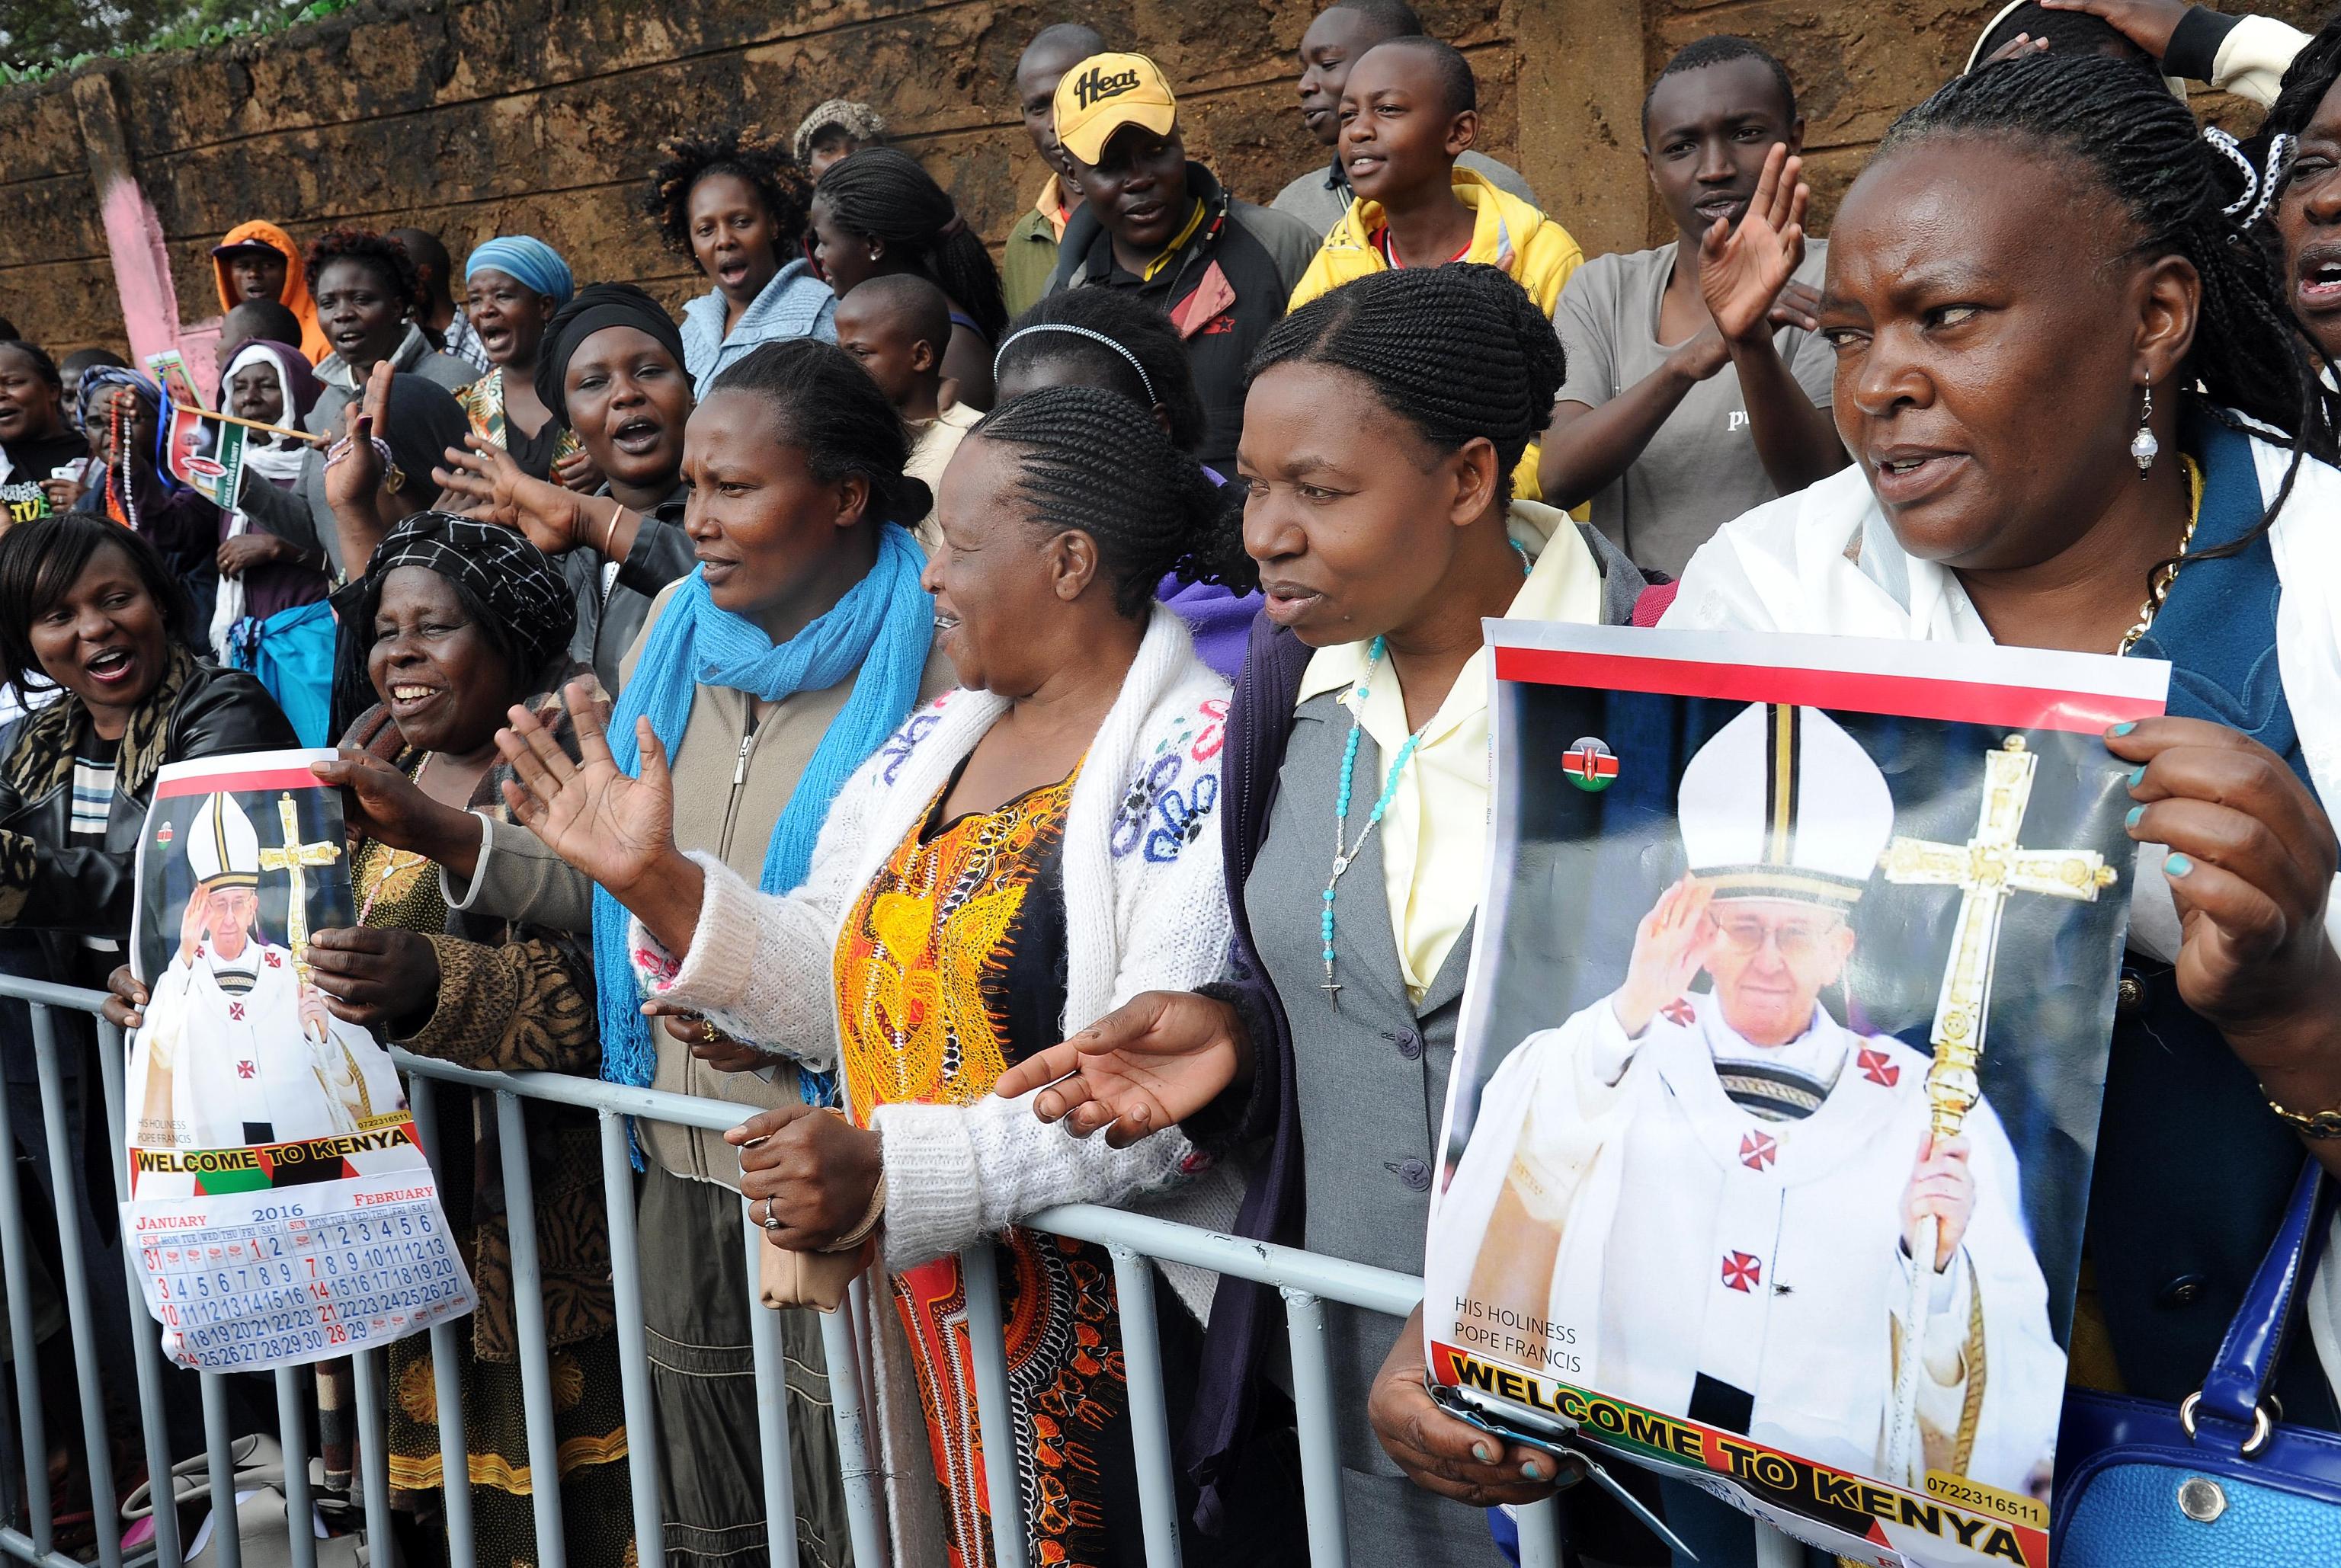 People wait for the visit of Pope Francis in the Kangemi neighborhood in Nairobi